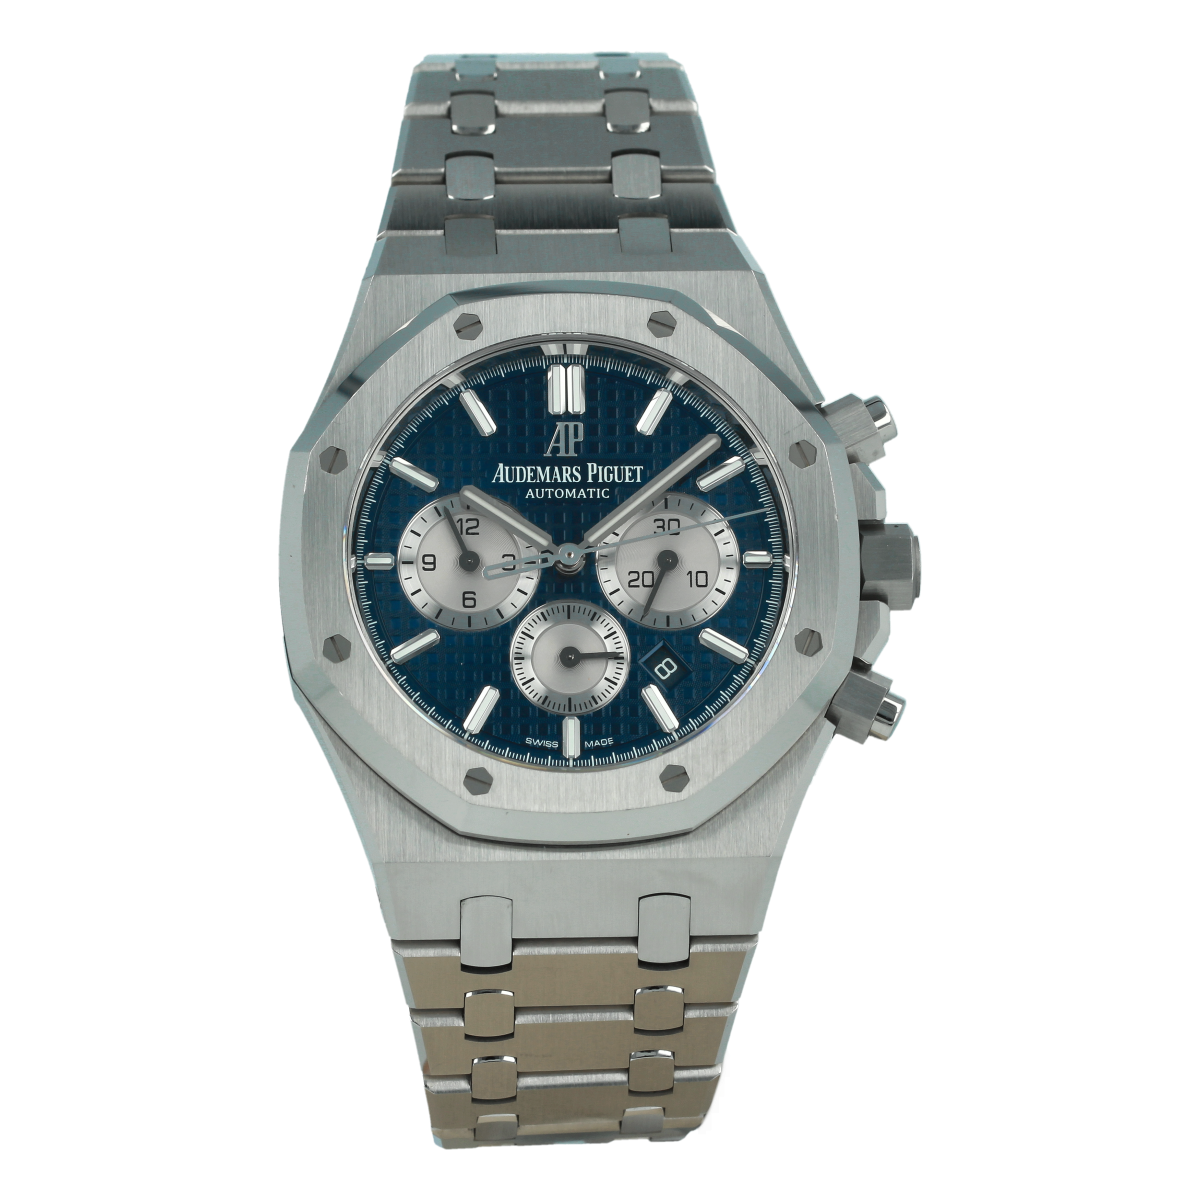 How to Verify the Authenticity of Audemars Piguet Watches